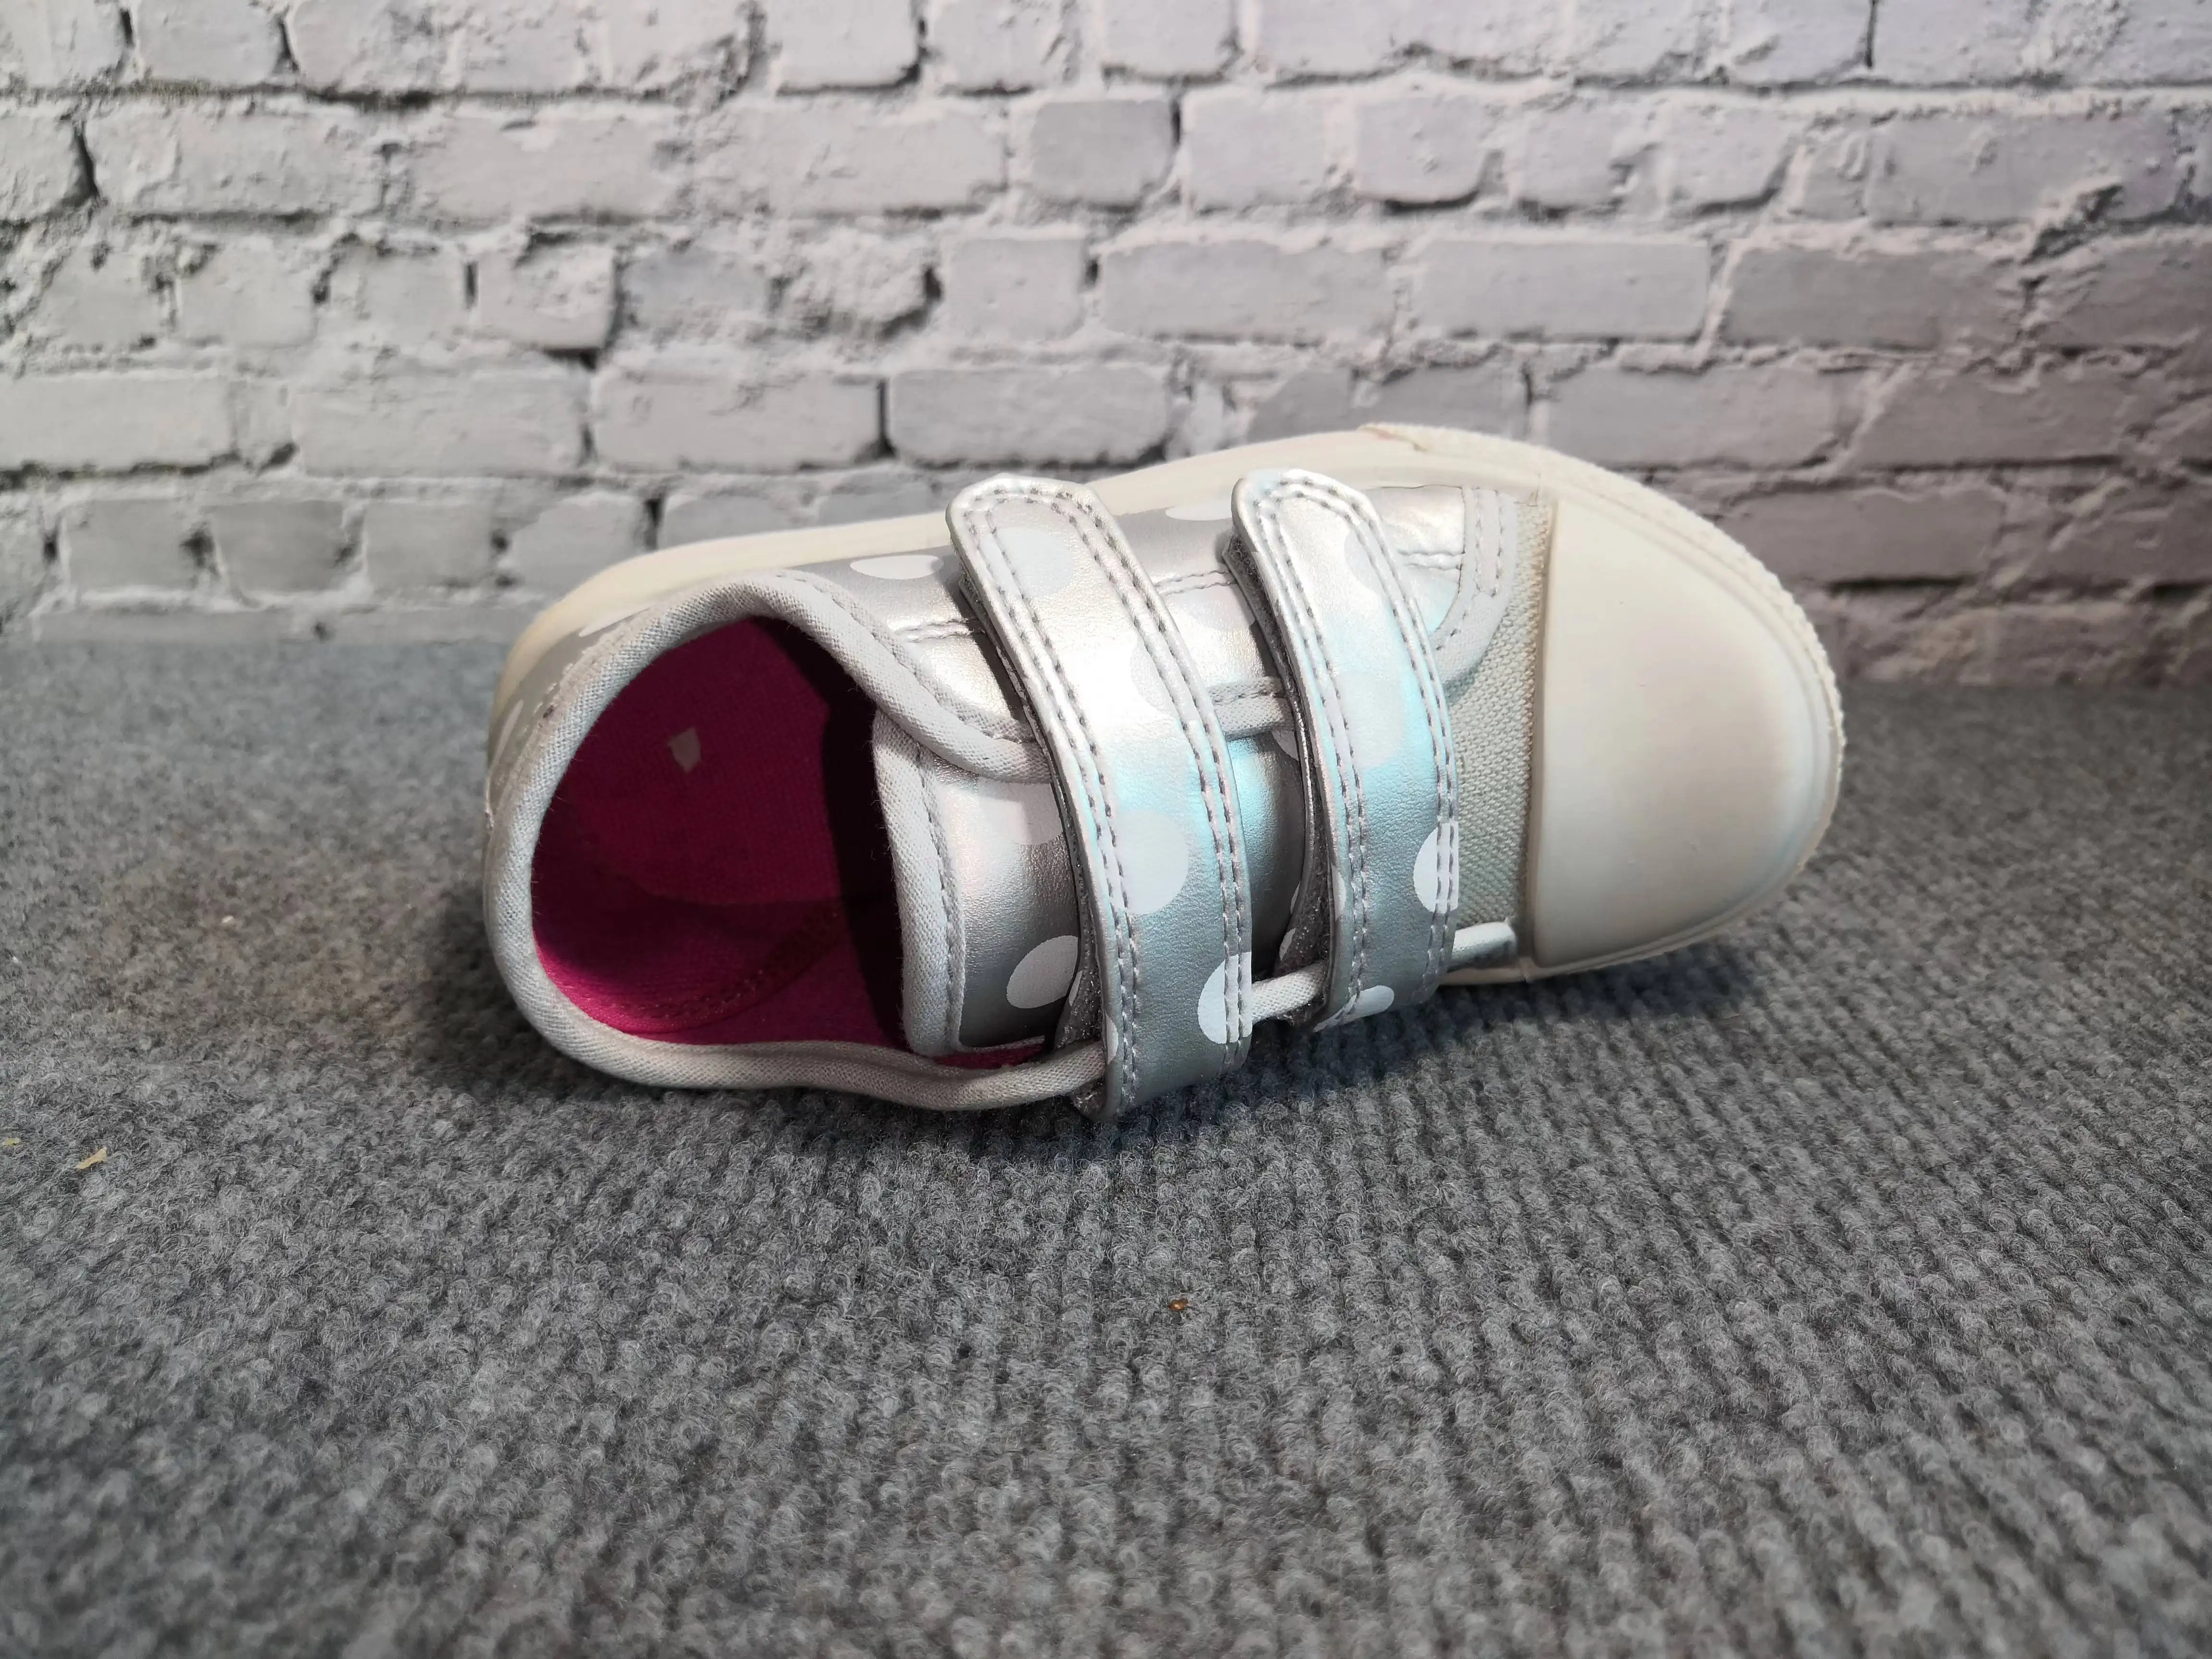 2022 Wholesale High Quality Sneakers for Boys and Girls Fashion Toddler Kids Soft Walking Shoes